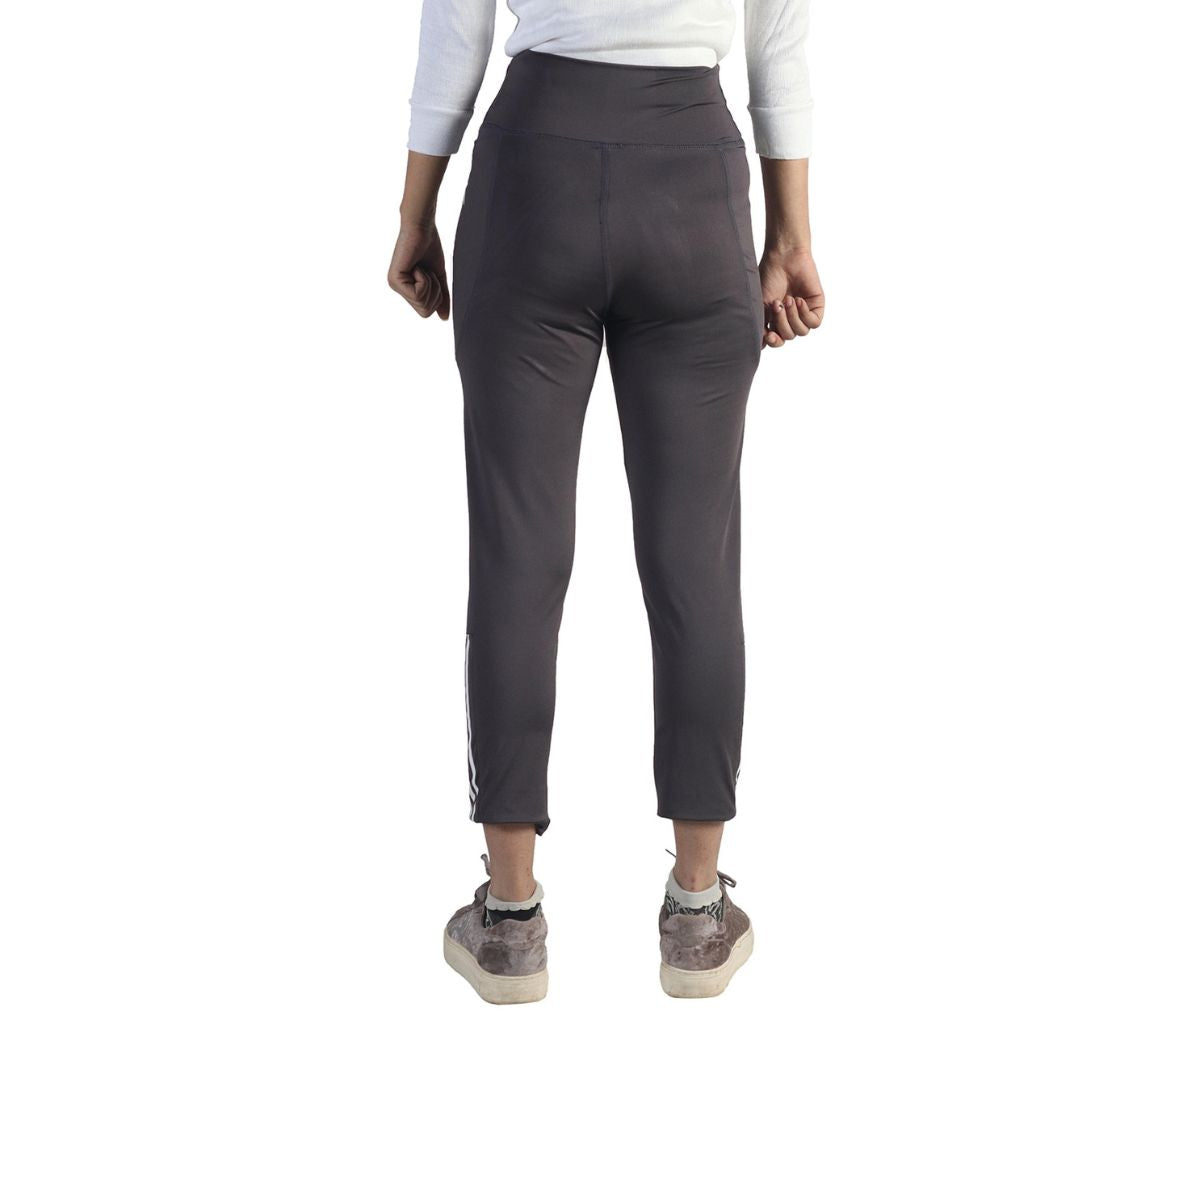 Flush Fashion - Pack Of 3 Women's Yoga Pants with Pockets Sports